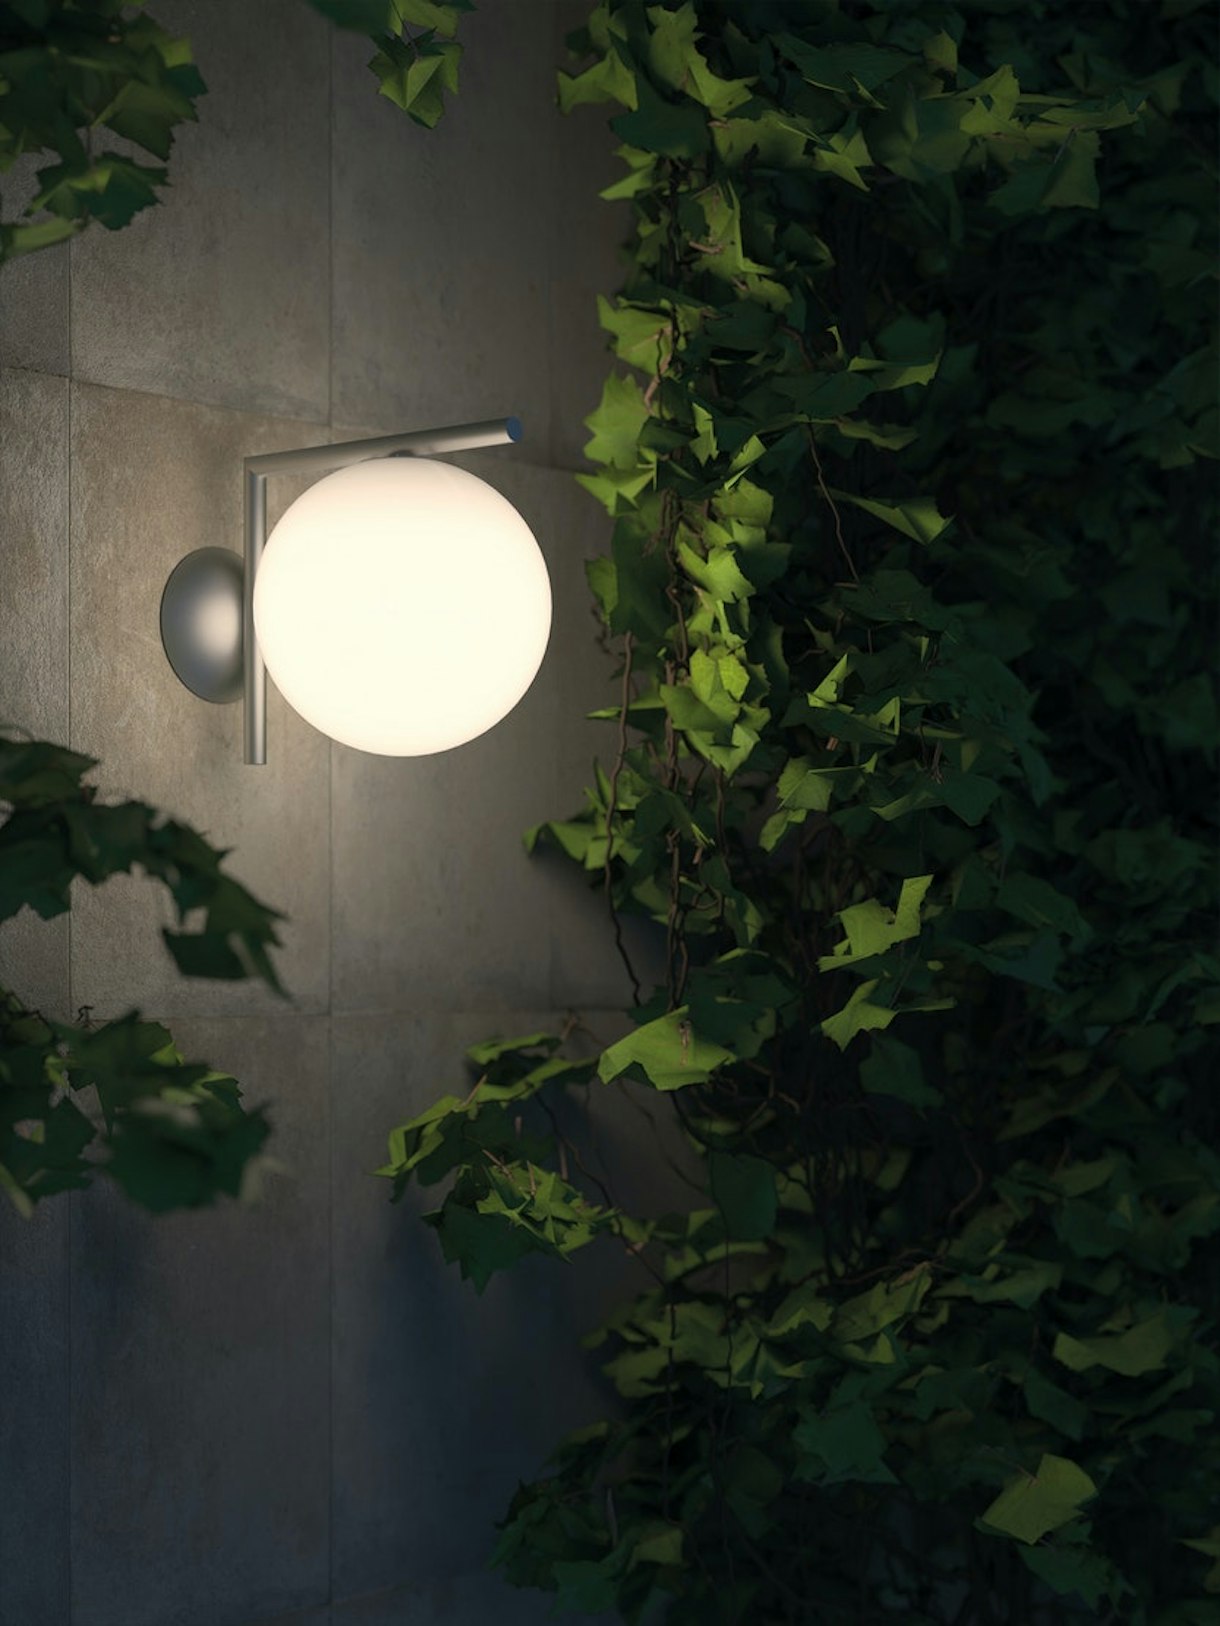 Bourgeon Verwisselbaar accumuleren Browse all IC Lights Wall Outdoor products | Flos